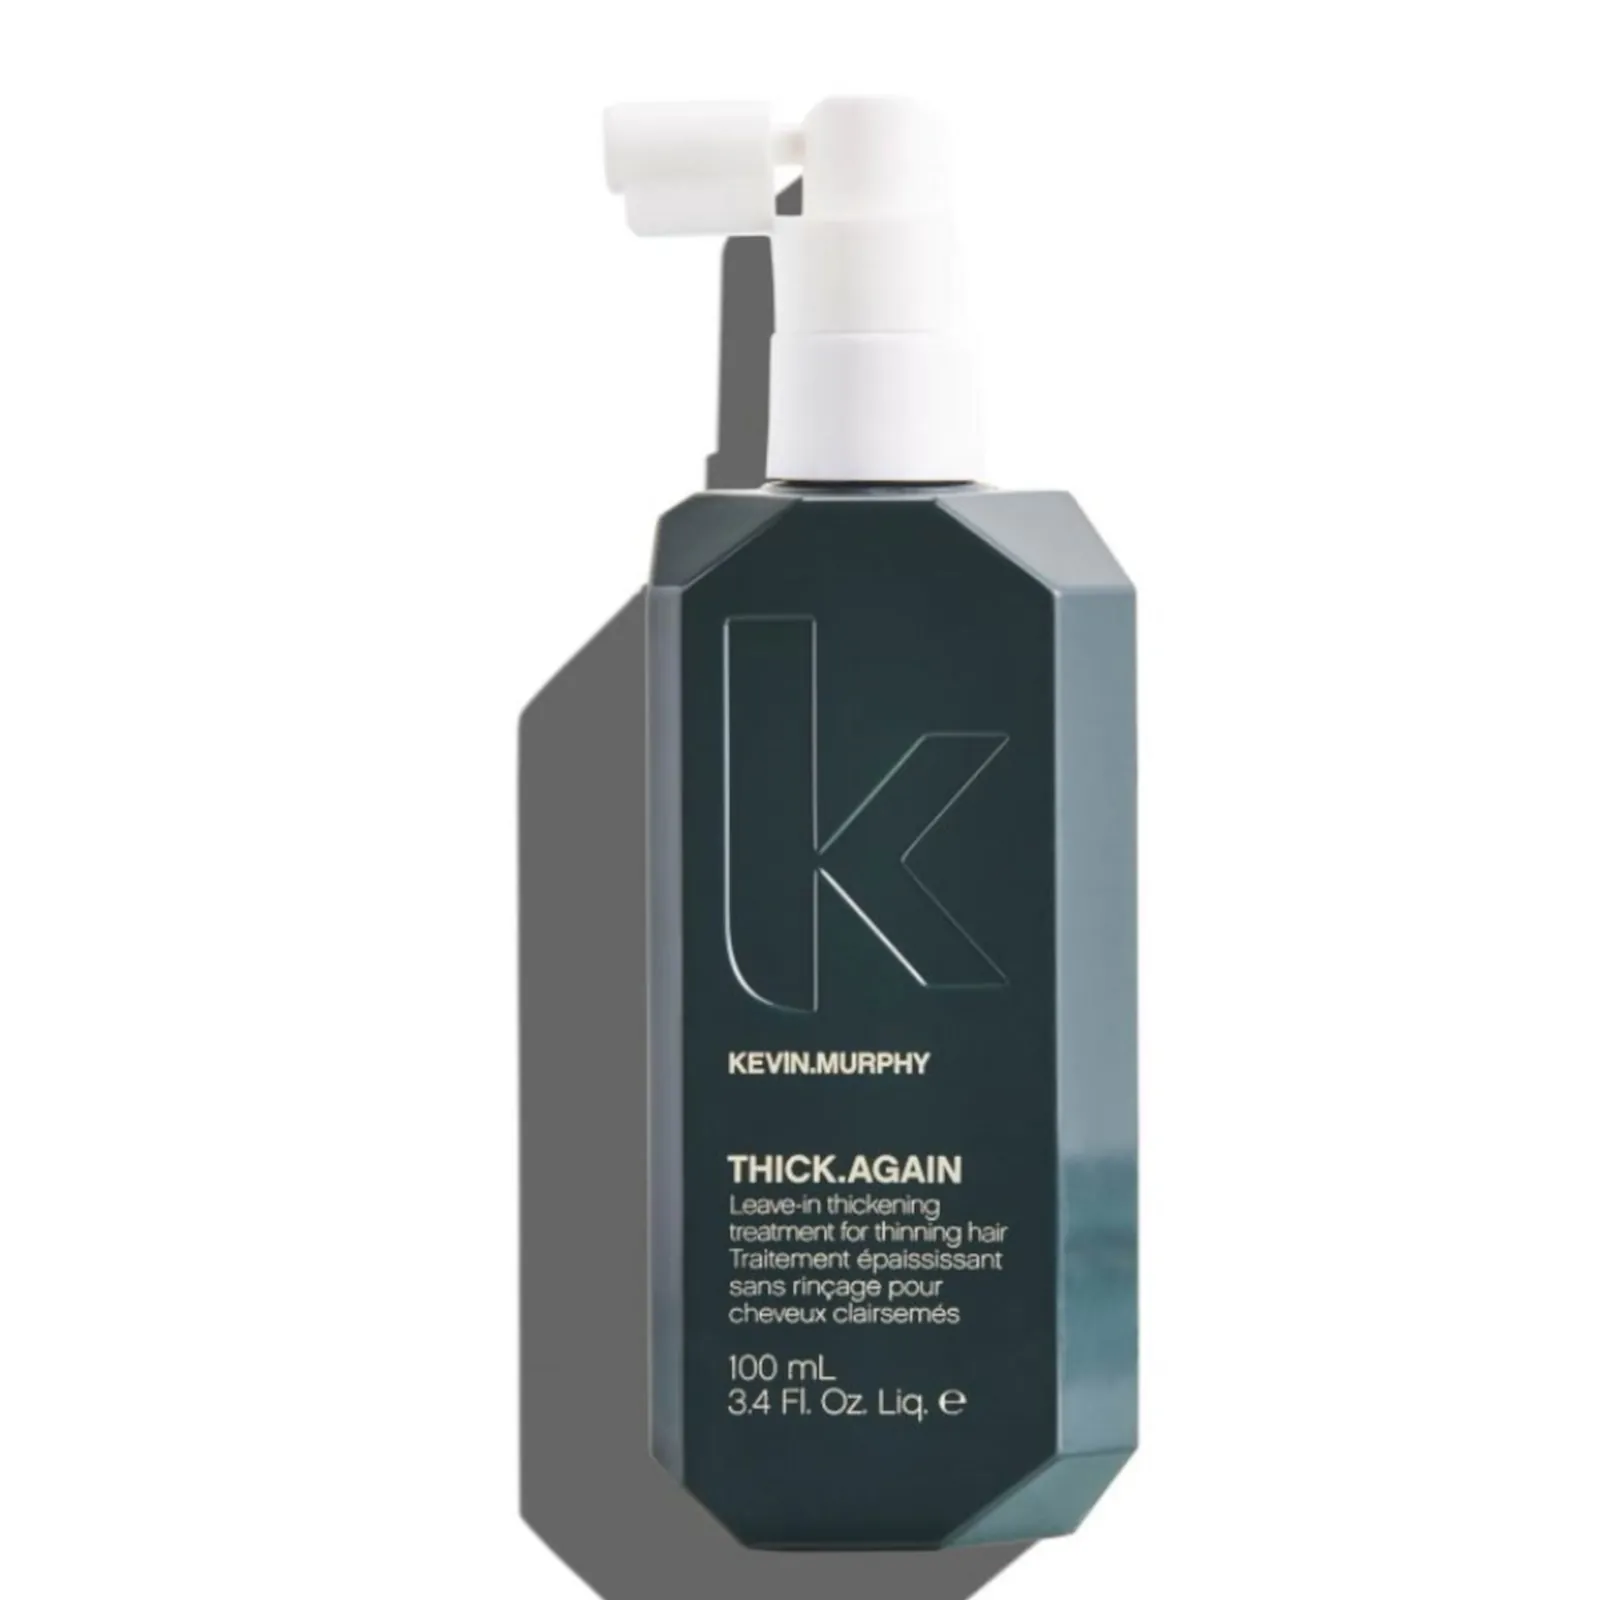 Kevin murphy thick again leave-in treatment for thinning hair 100ml   - Lyskin